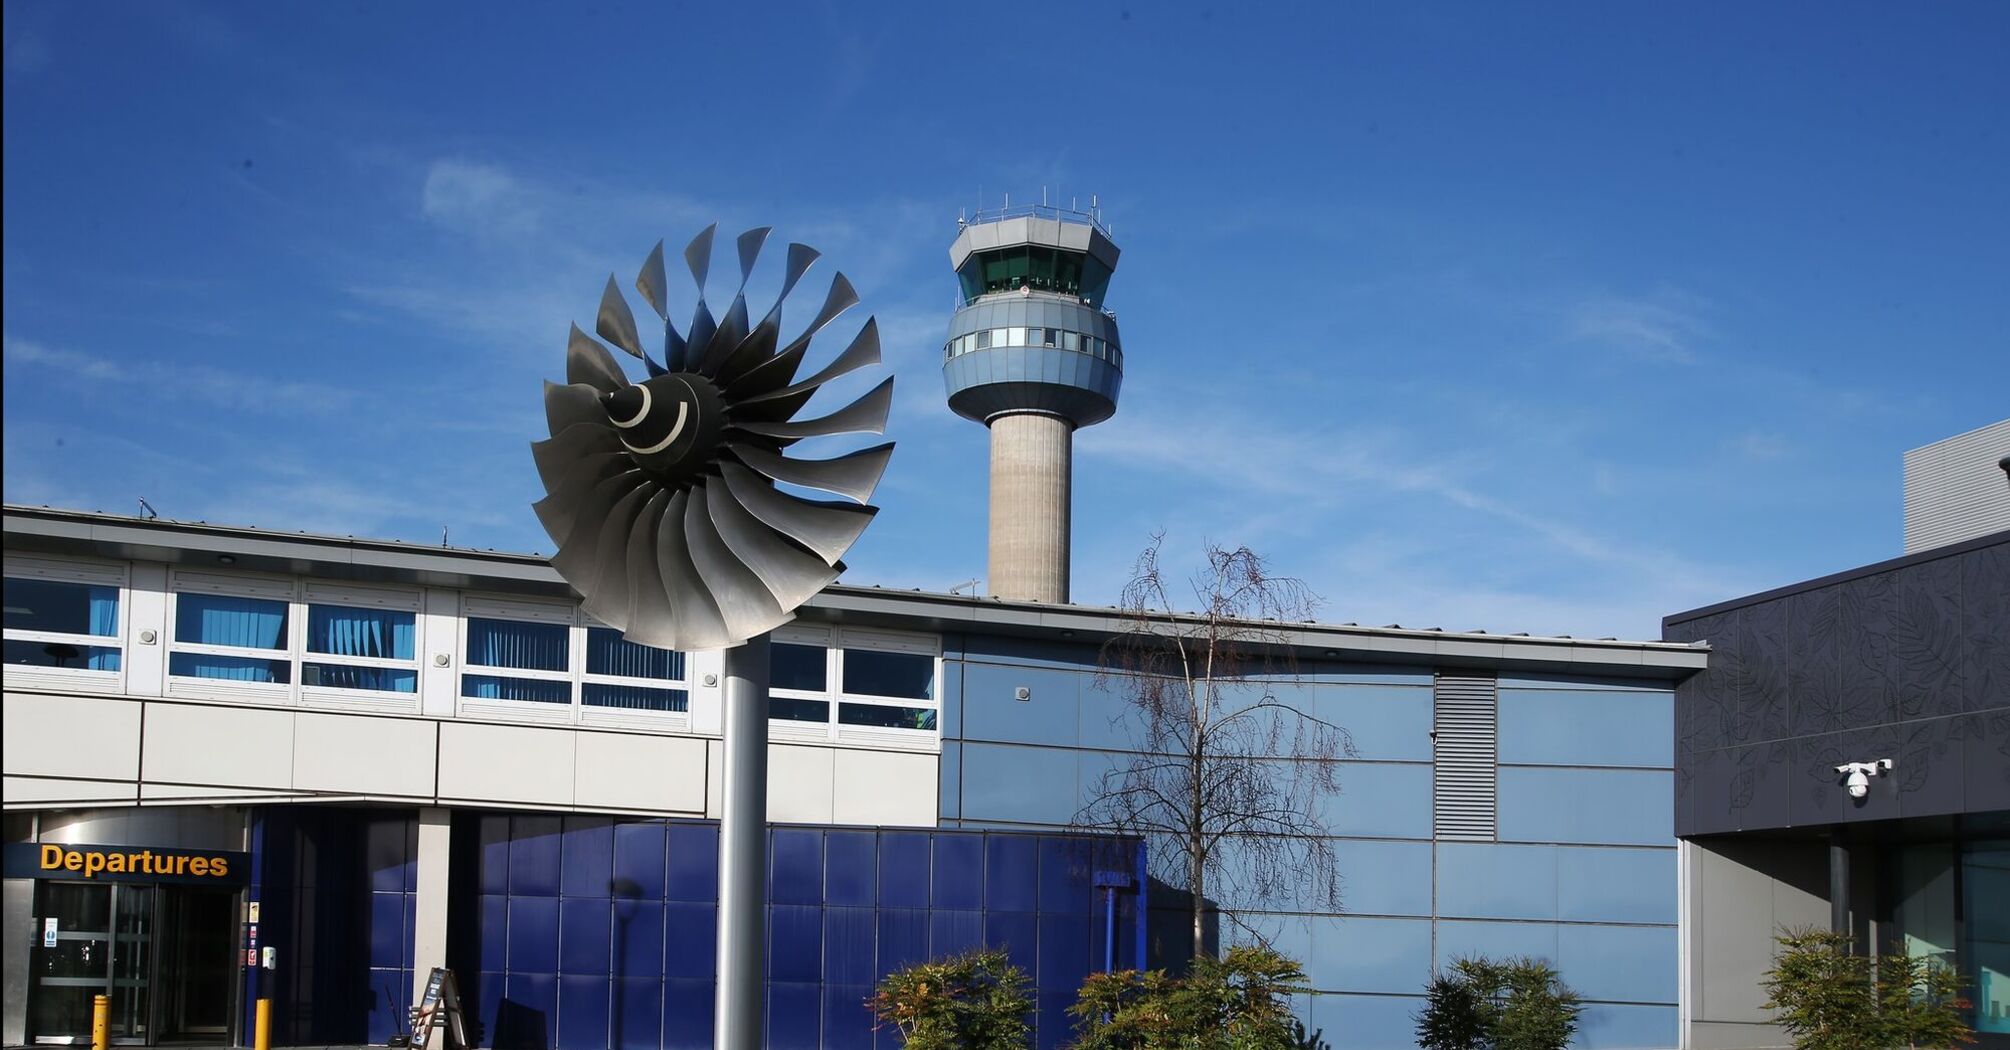 East Midlands Airport to receive £120 million investment: what will be changed and improved